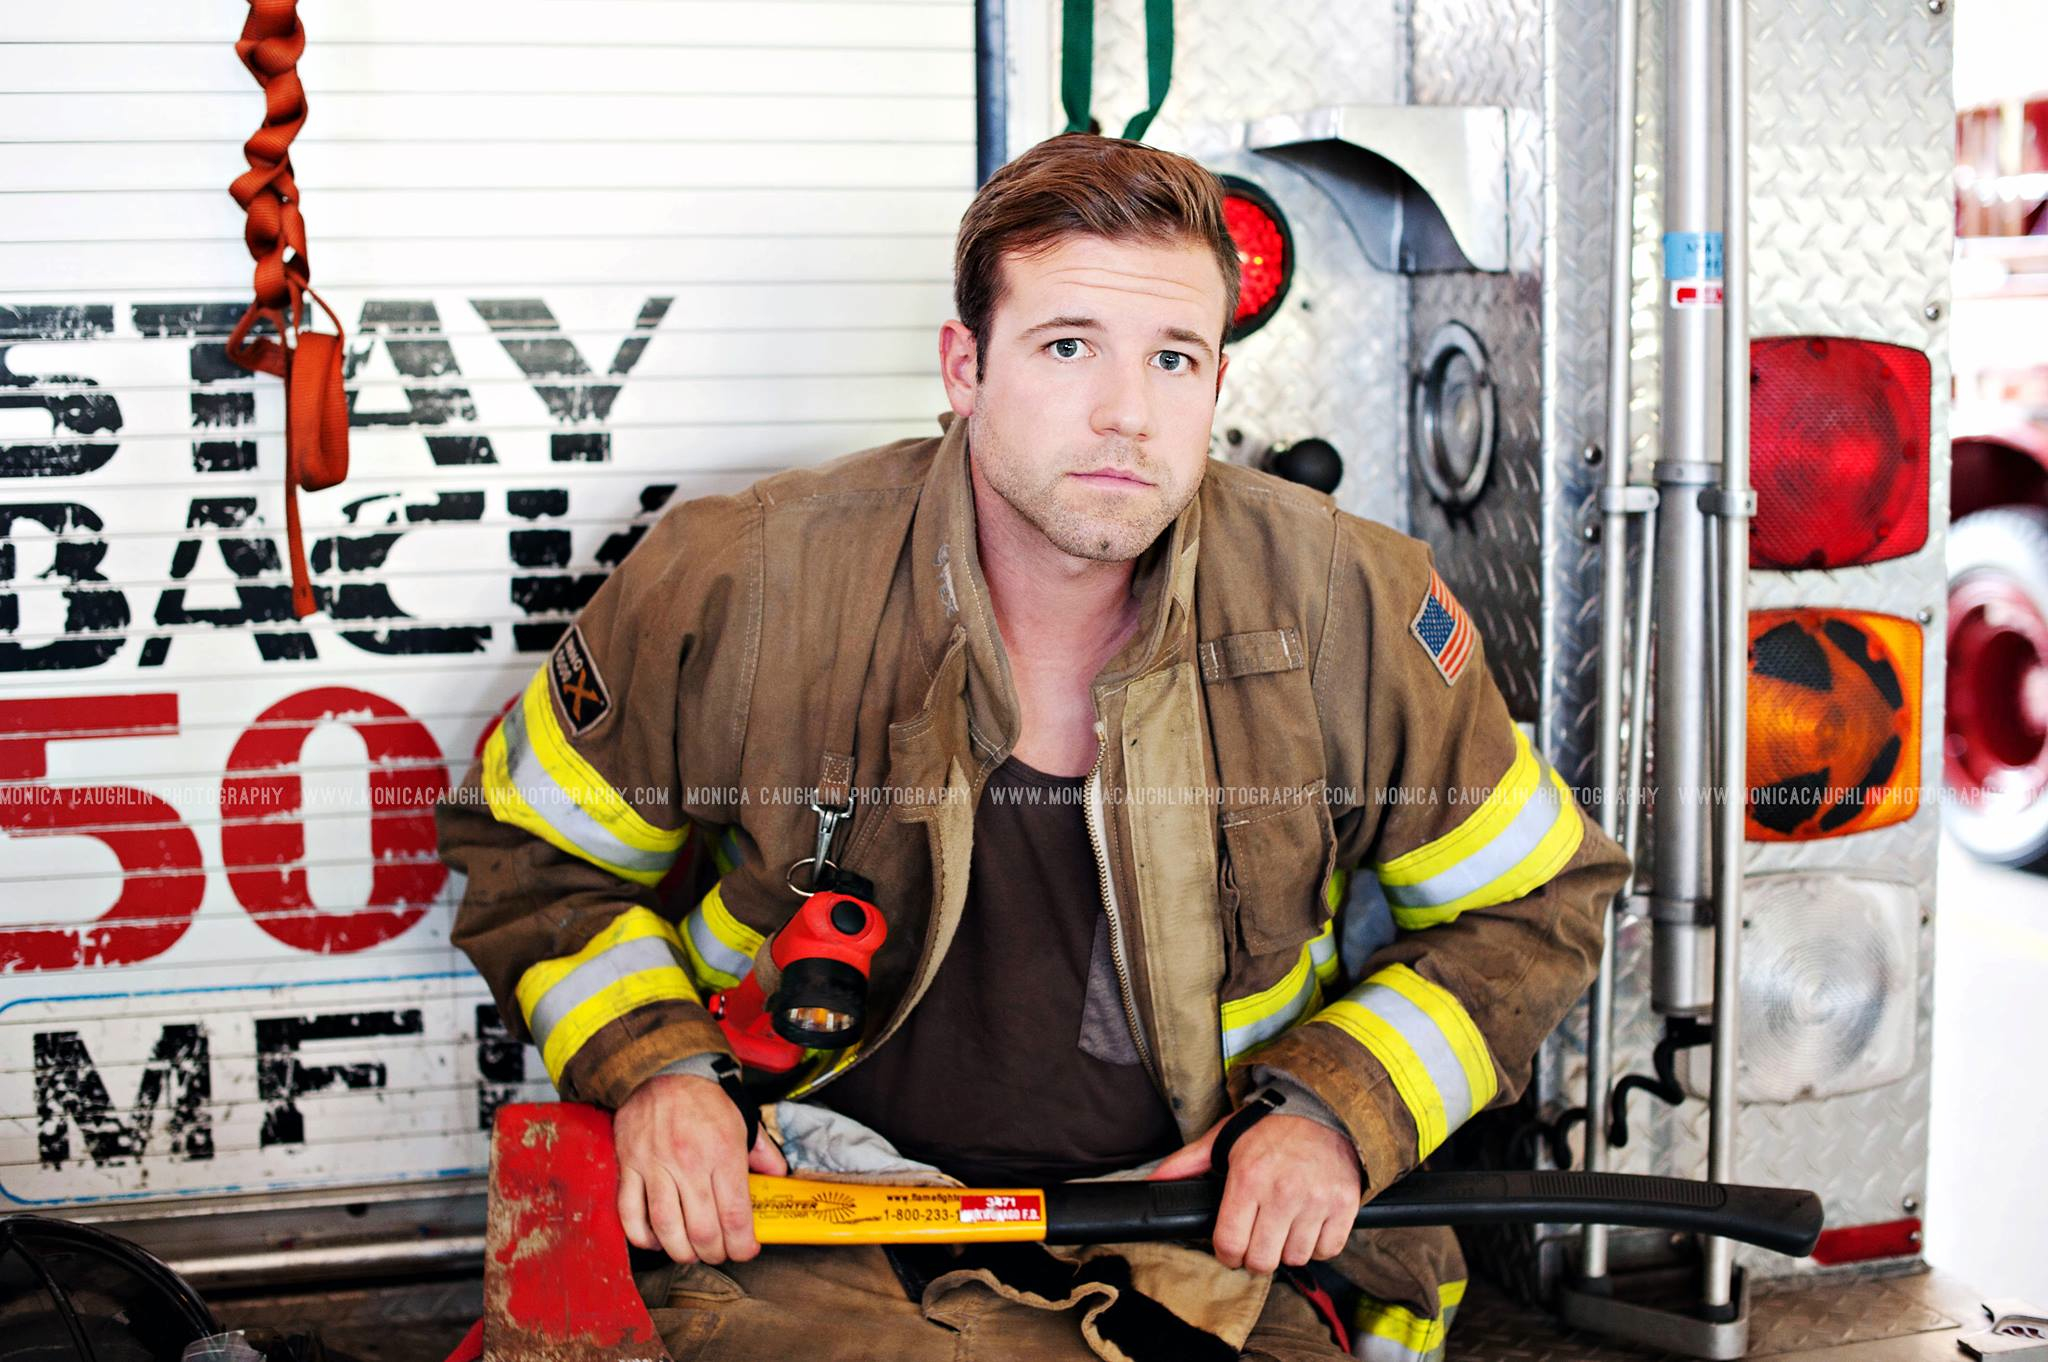 Fire fighter